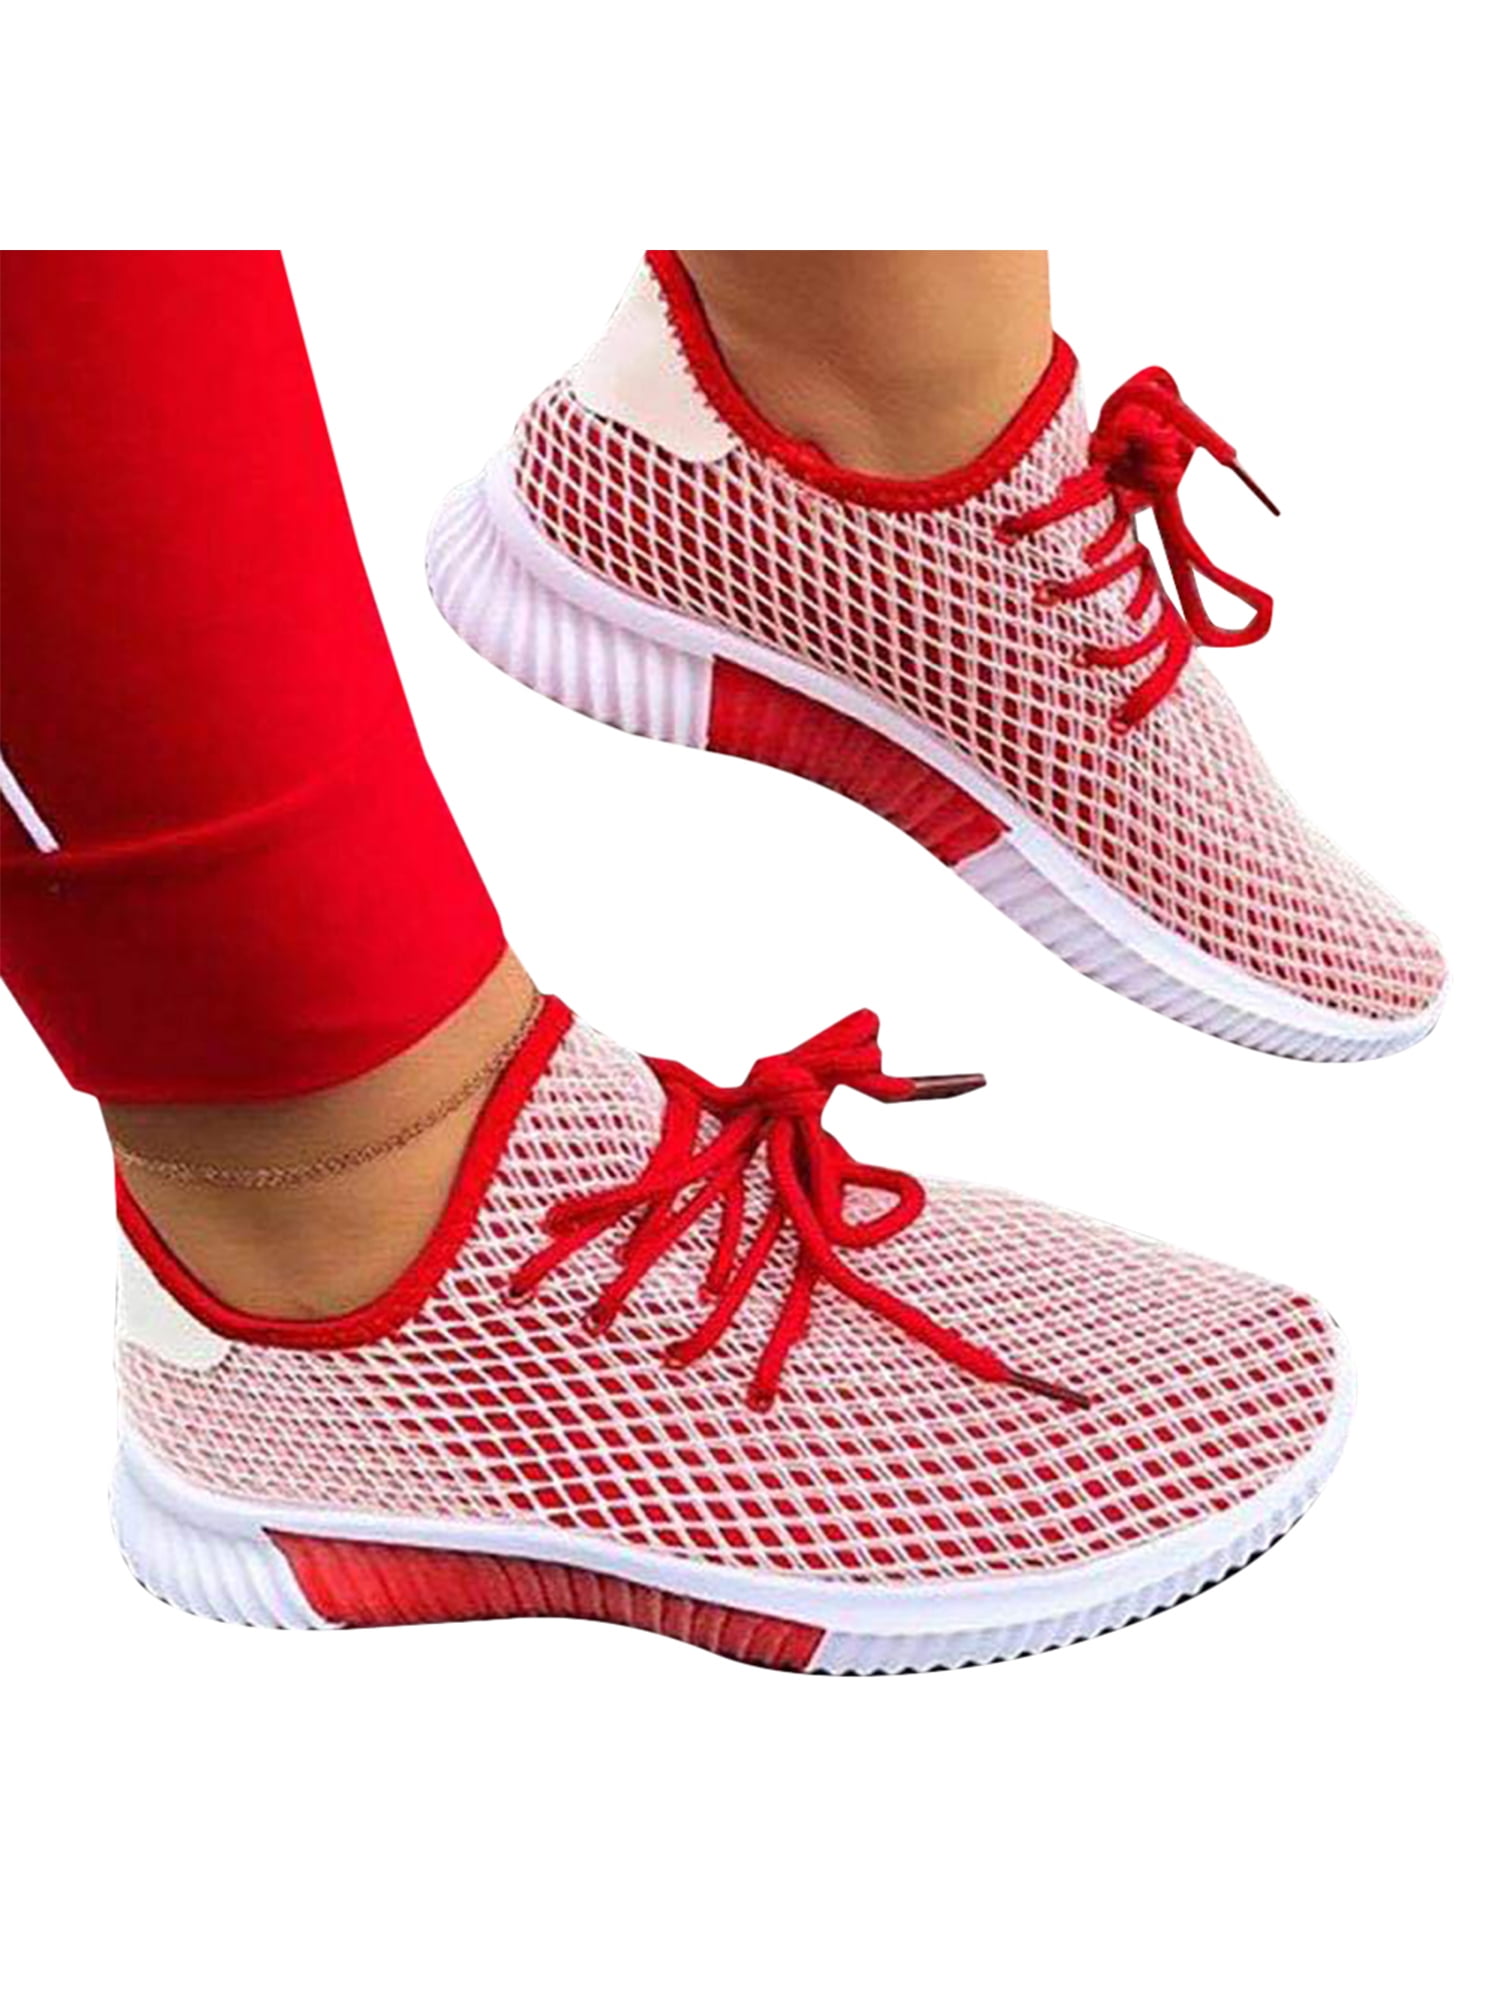 Womens Ladies Trainers Lace-up Fitness Sports Shoes Athletic Running Sneakers